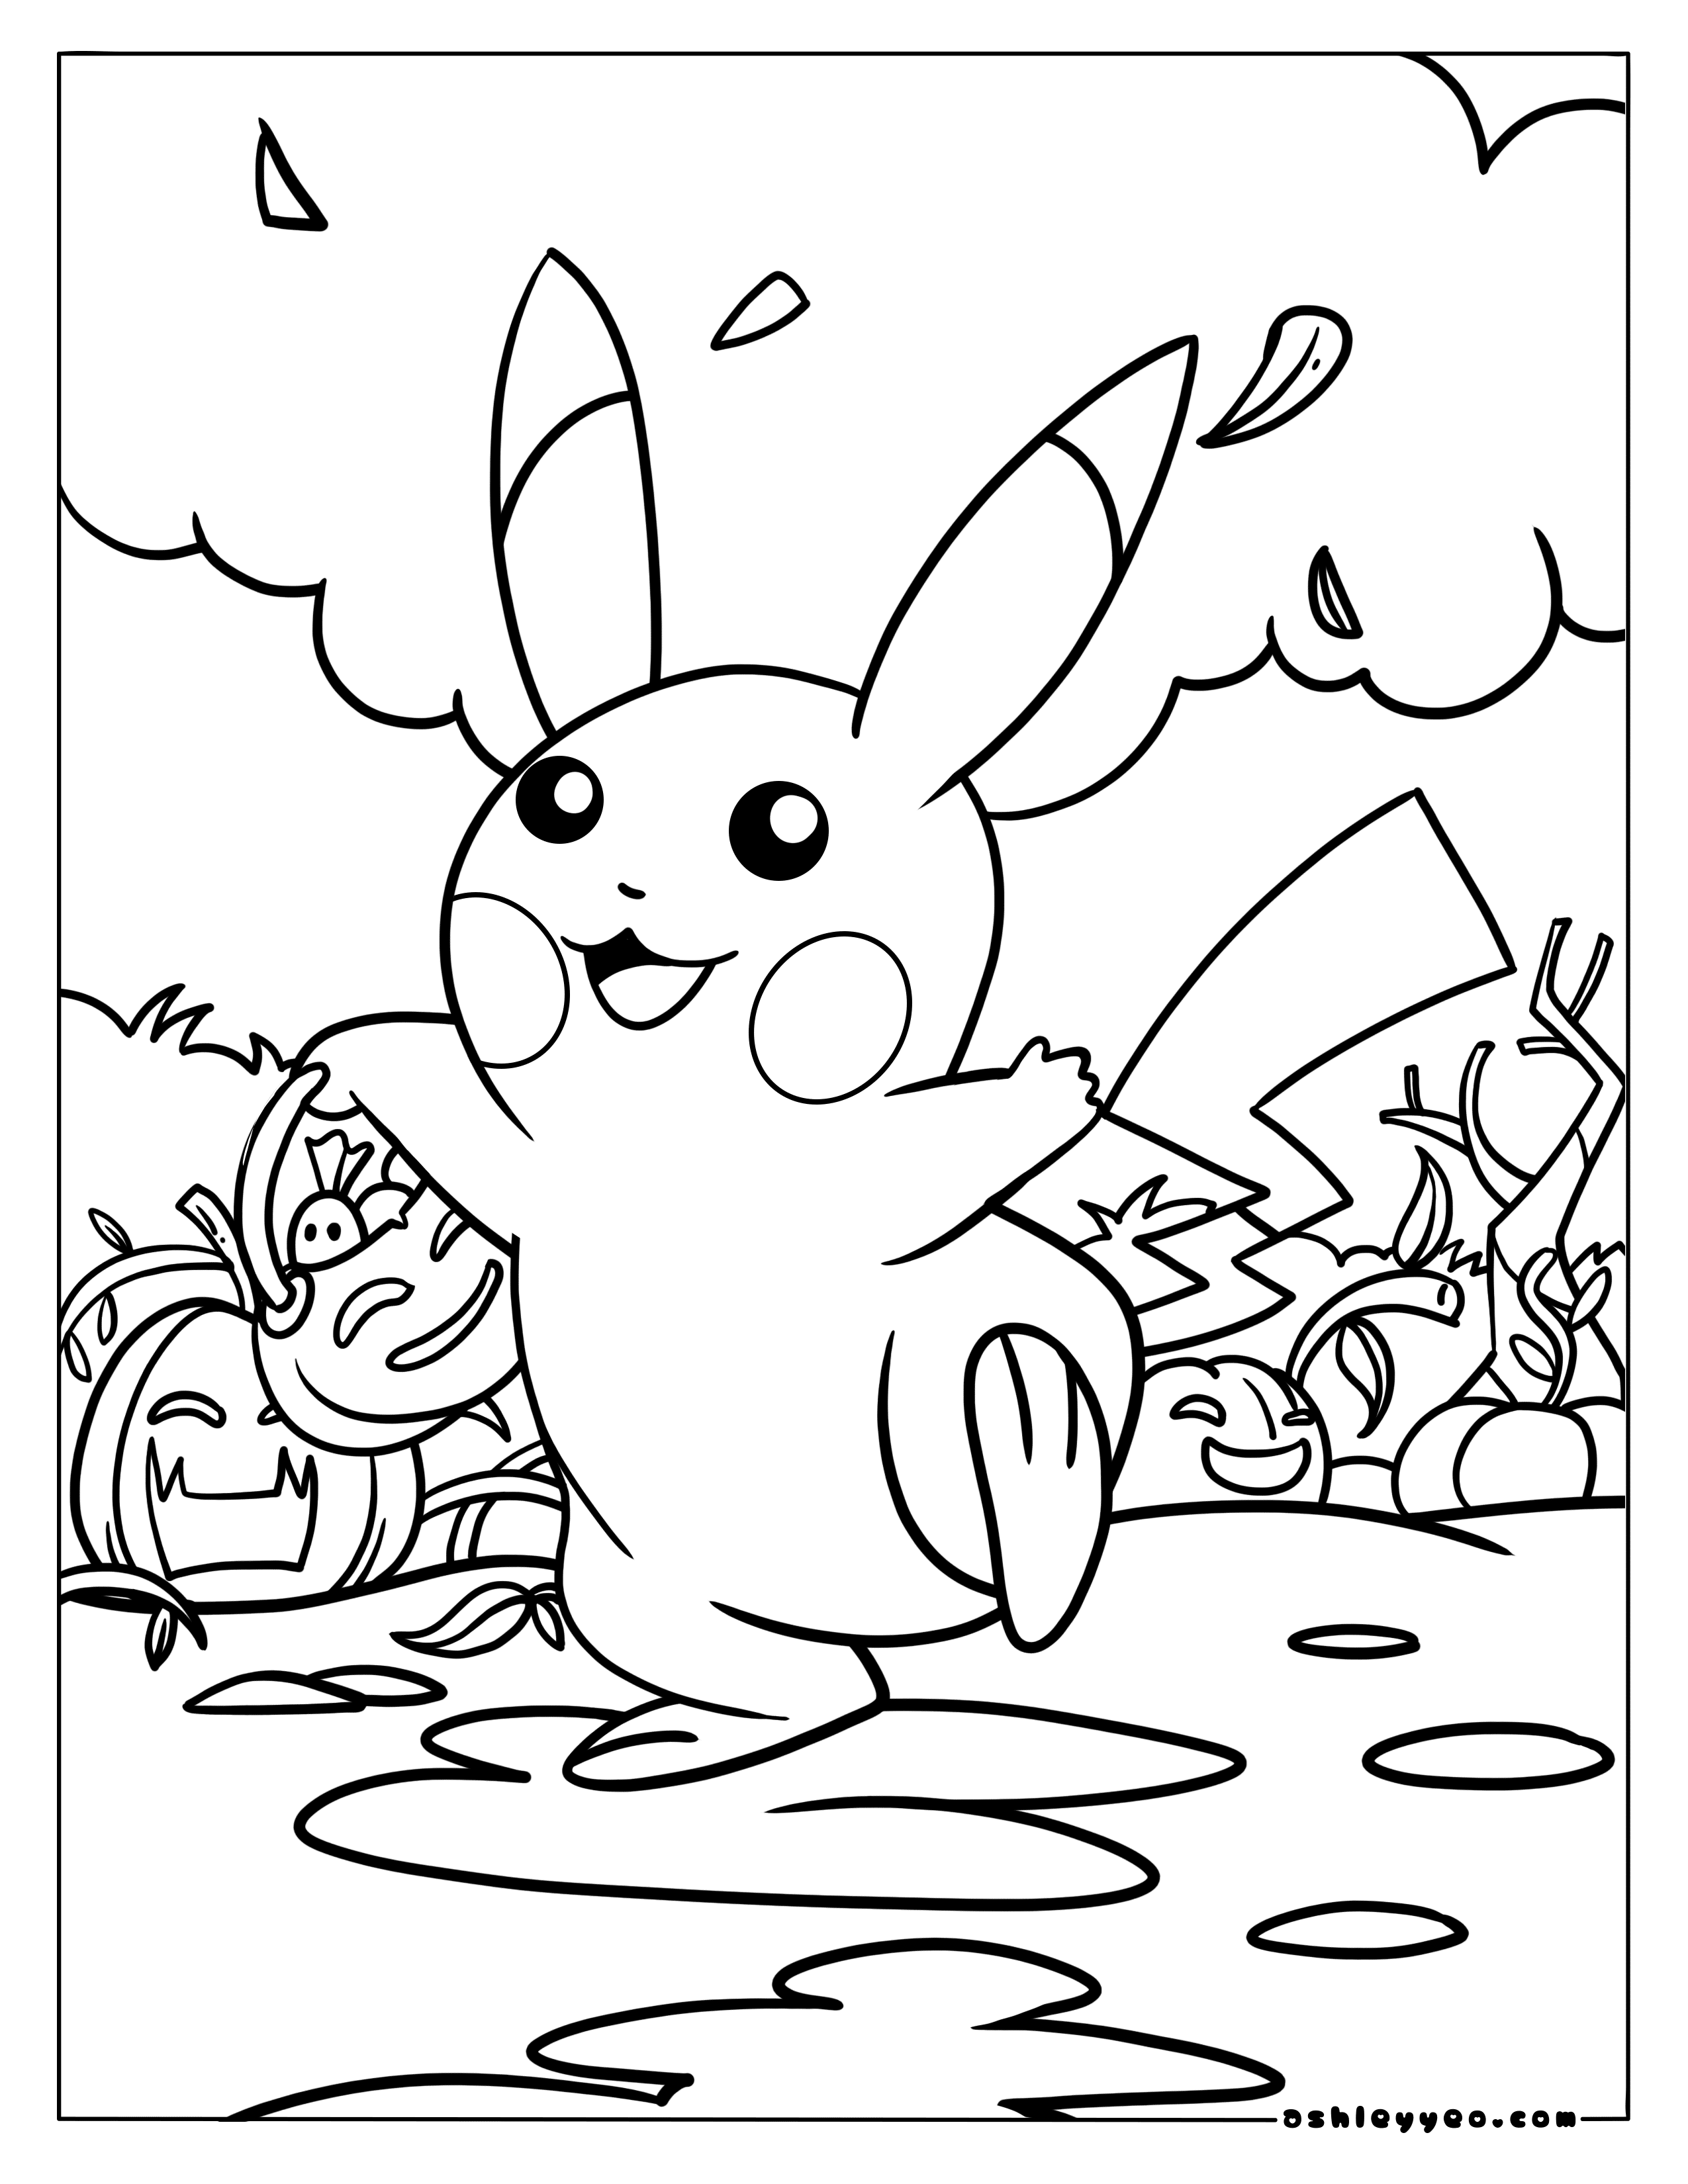 mew pokemon coloring page – Having fun with children